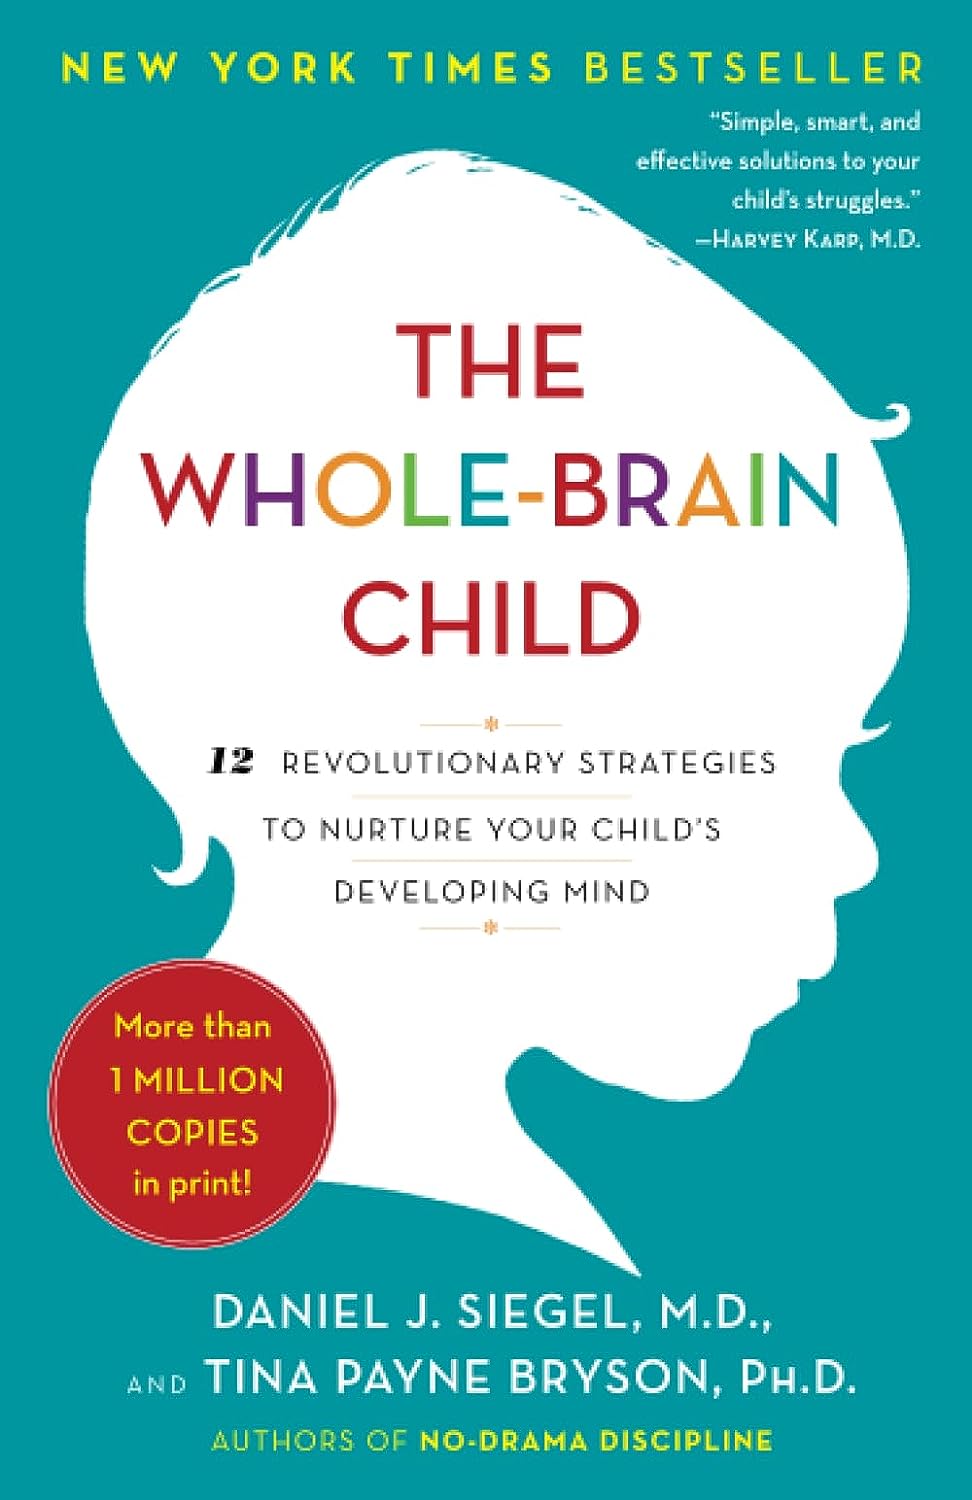 The Whole-Brain Child Review